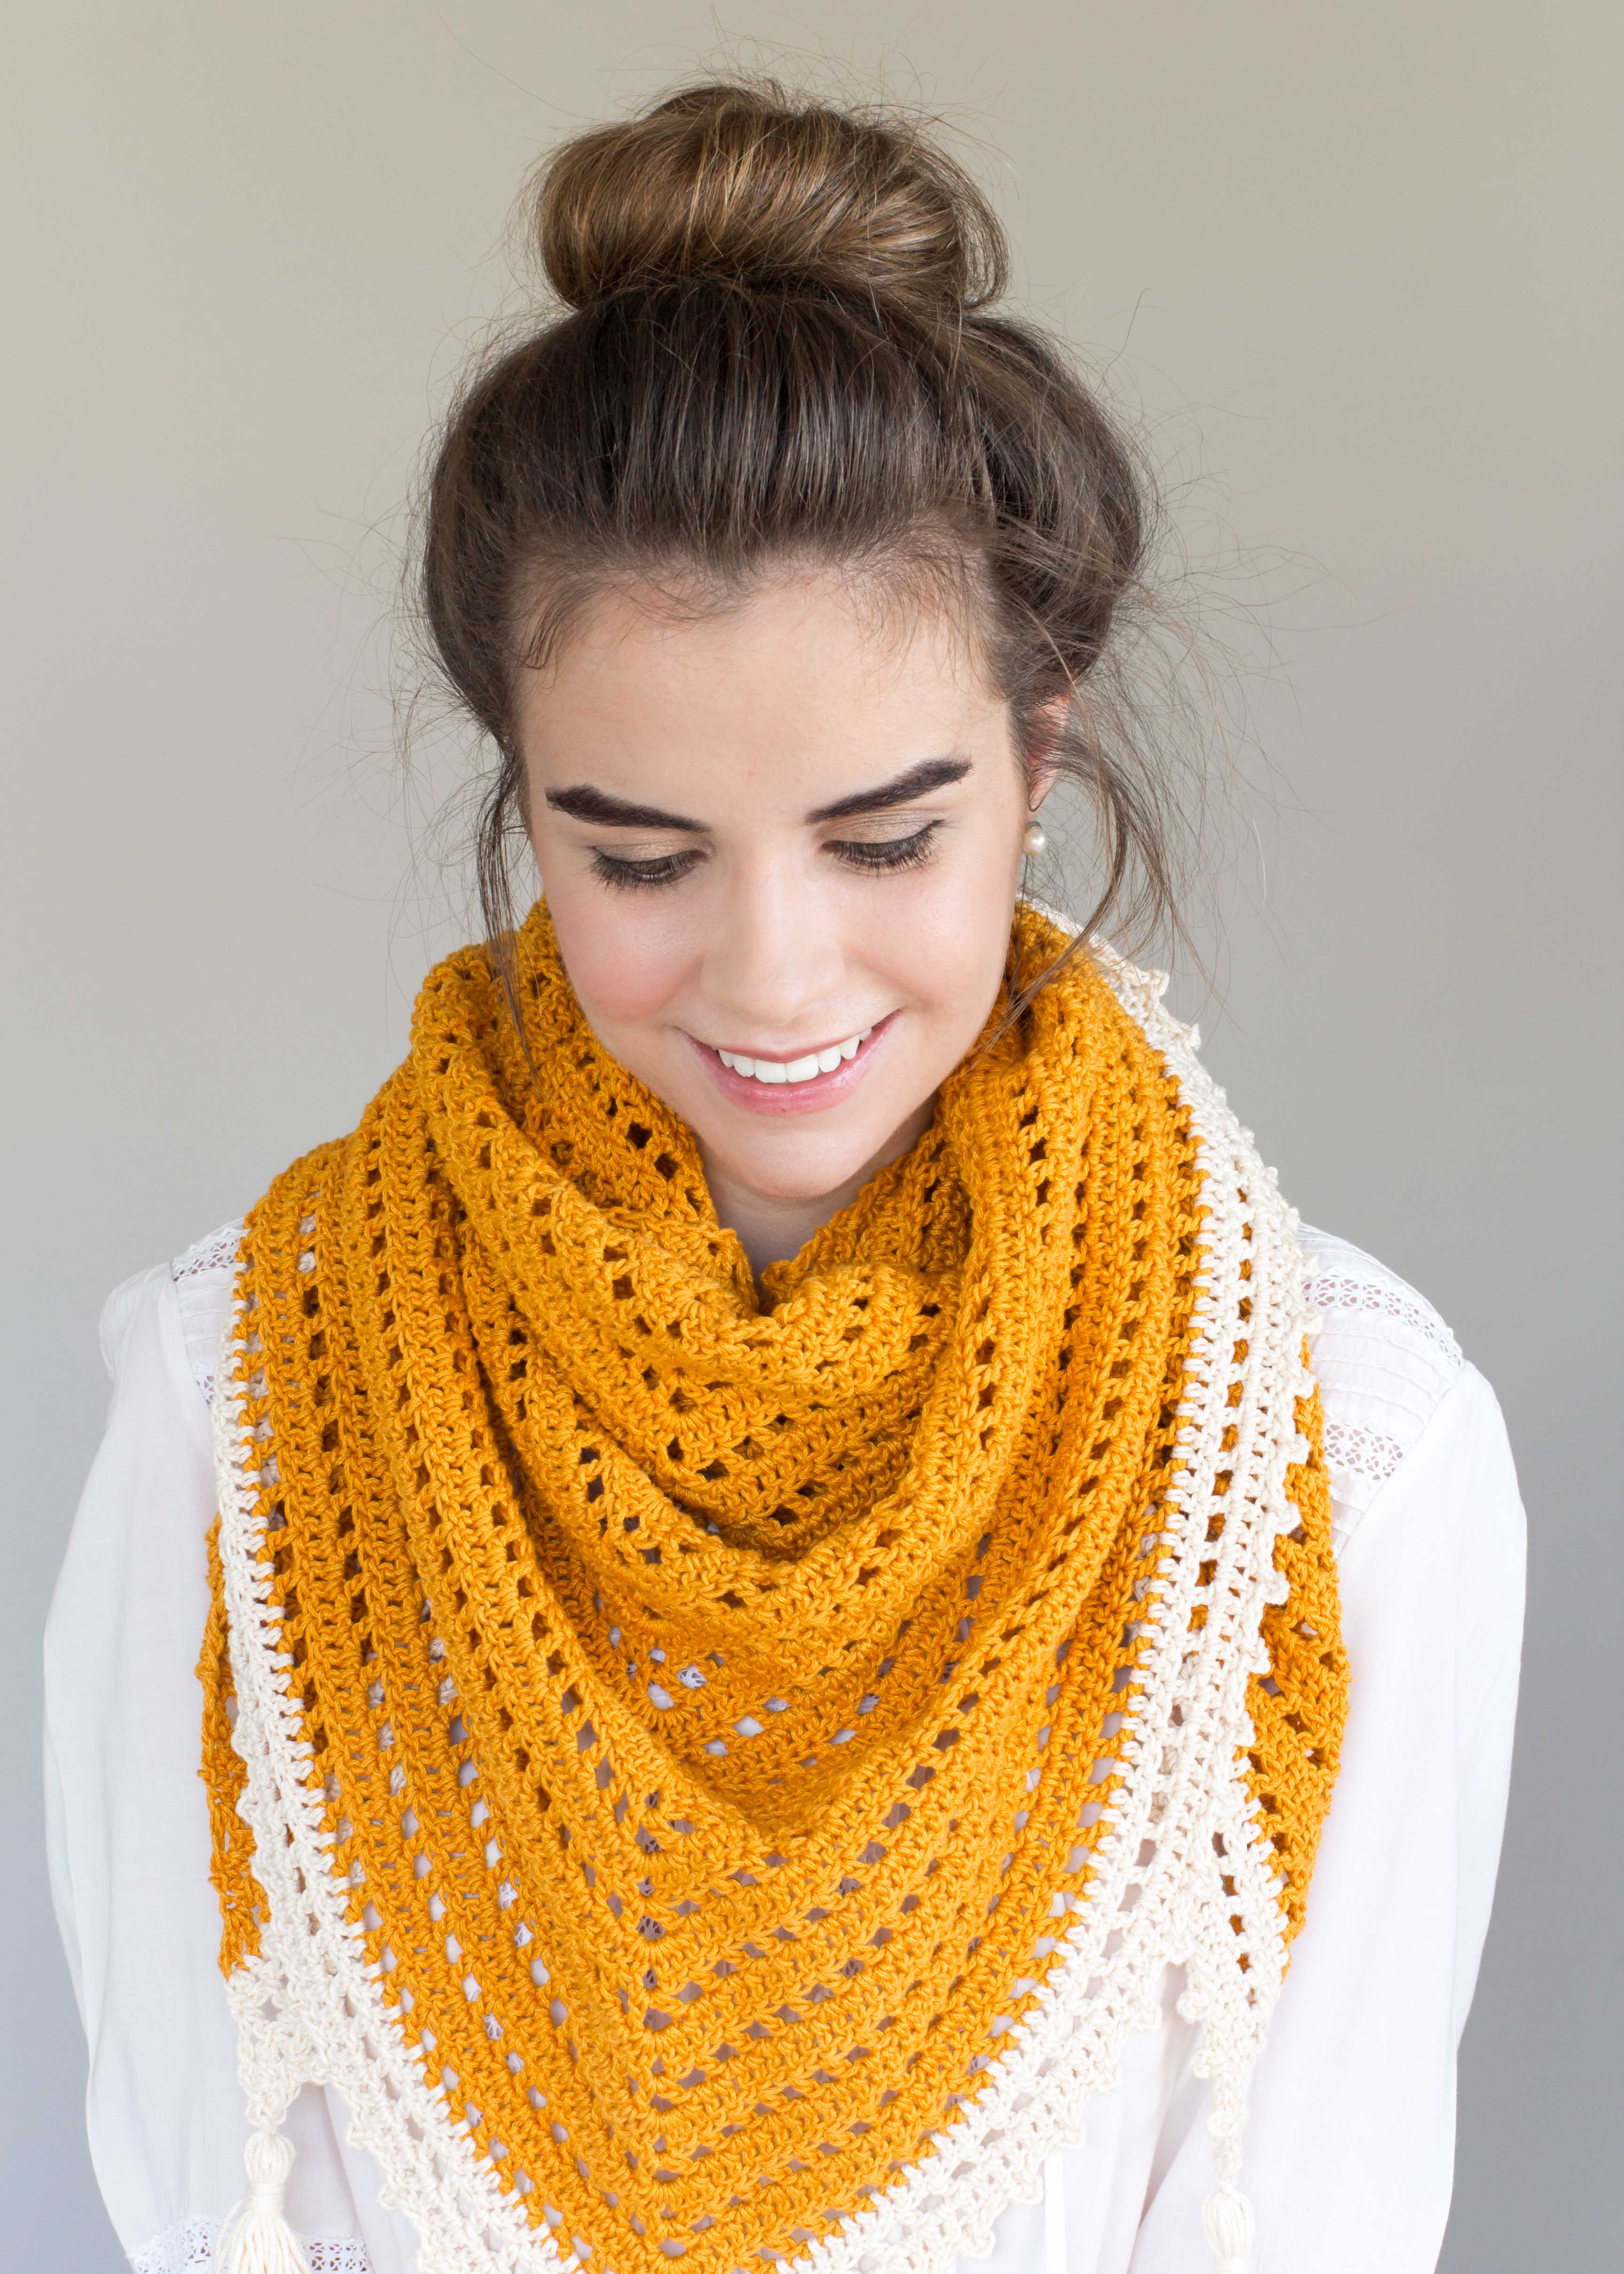 HONEY BIRD TRIANGLE SCARF - One of the most challenging parts about crochet is finding the right crochet pattern. This list of free crochet patterns will guide you in the right direction. #CrochetPattern #CrochetAddict #FreeCrochetPatterns